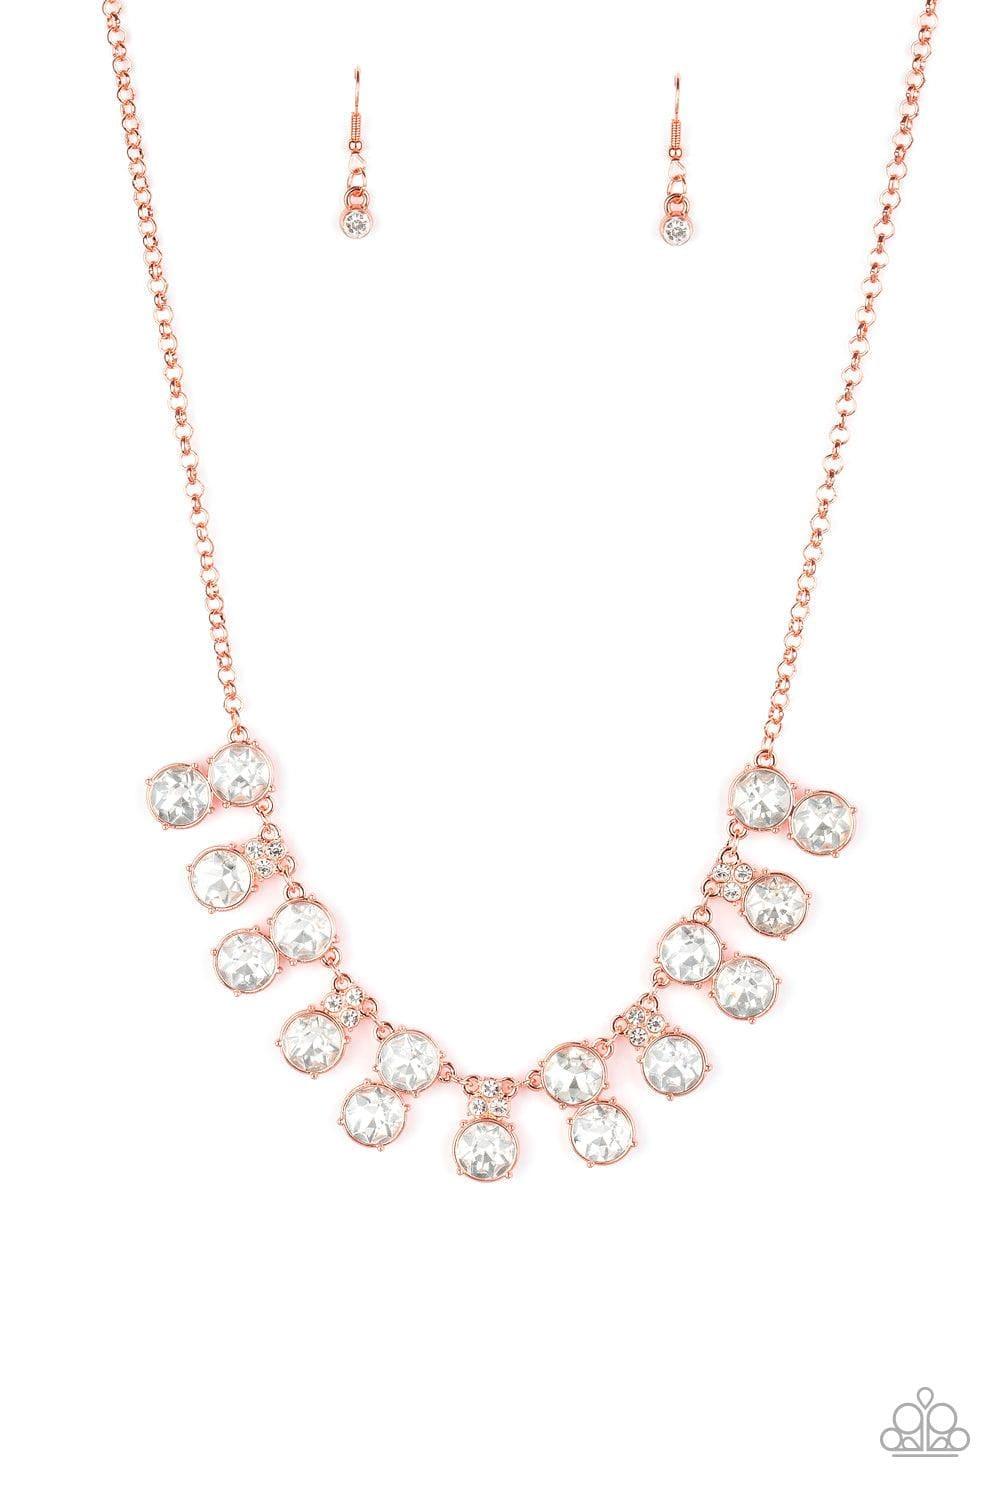 Paparazzi Accessories - Top Dollar Twinkle - Copper Necklace - Bling by JessieK